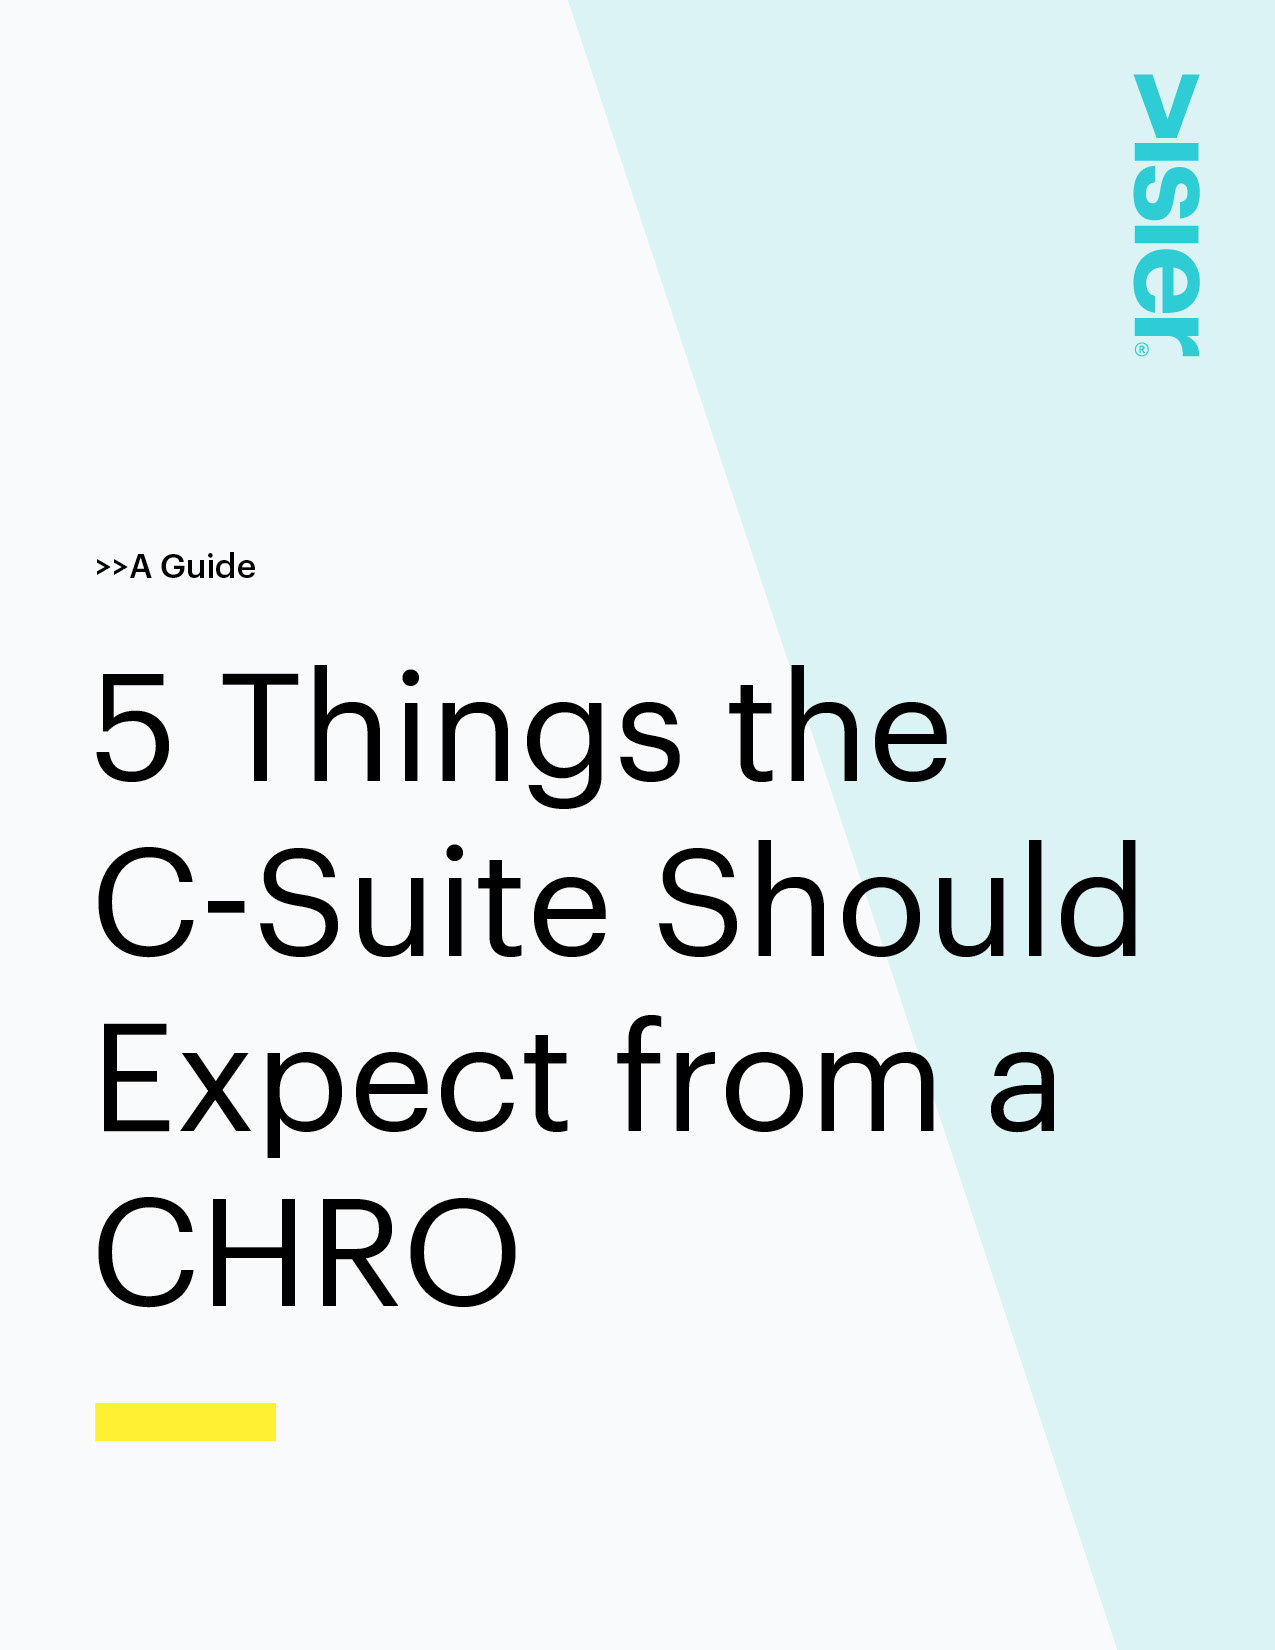 Five things c-suite should expect chro cover